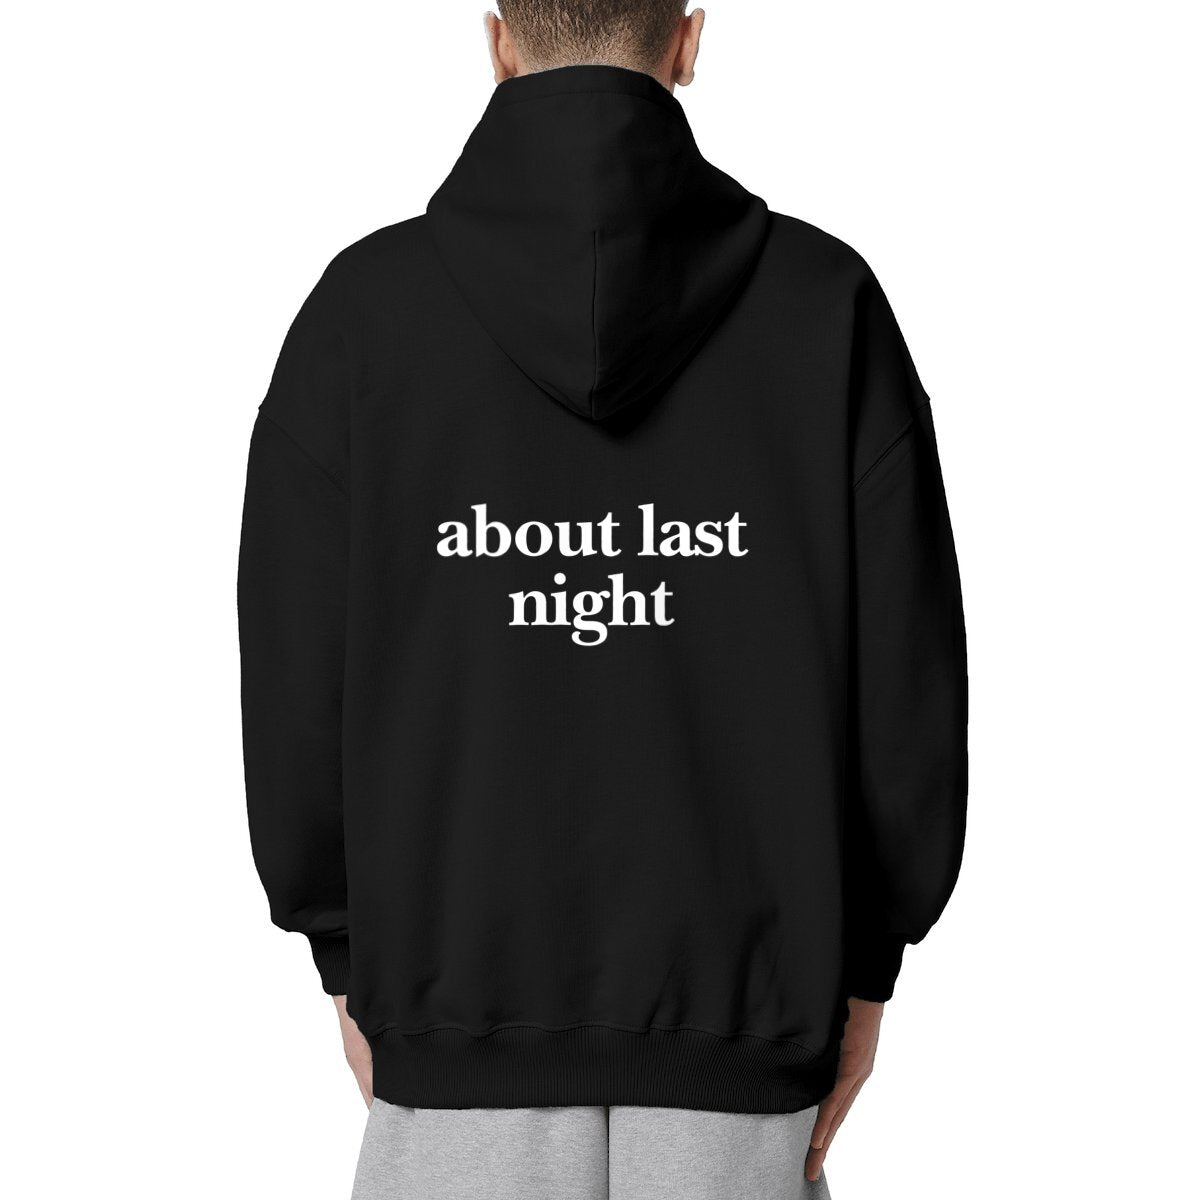 about last night hoodie over. garçon garçon essentiel black oversized hoodie. Encapsulate effortless Parisian cool with this hoodie, its subtle 'about last night ON THE BACK' emblem whispering understated sophistication. Crafted for comfort, styled for streets of Paris.